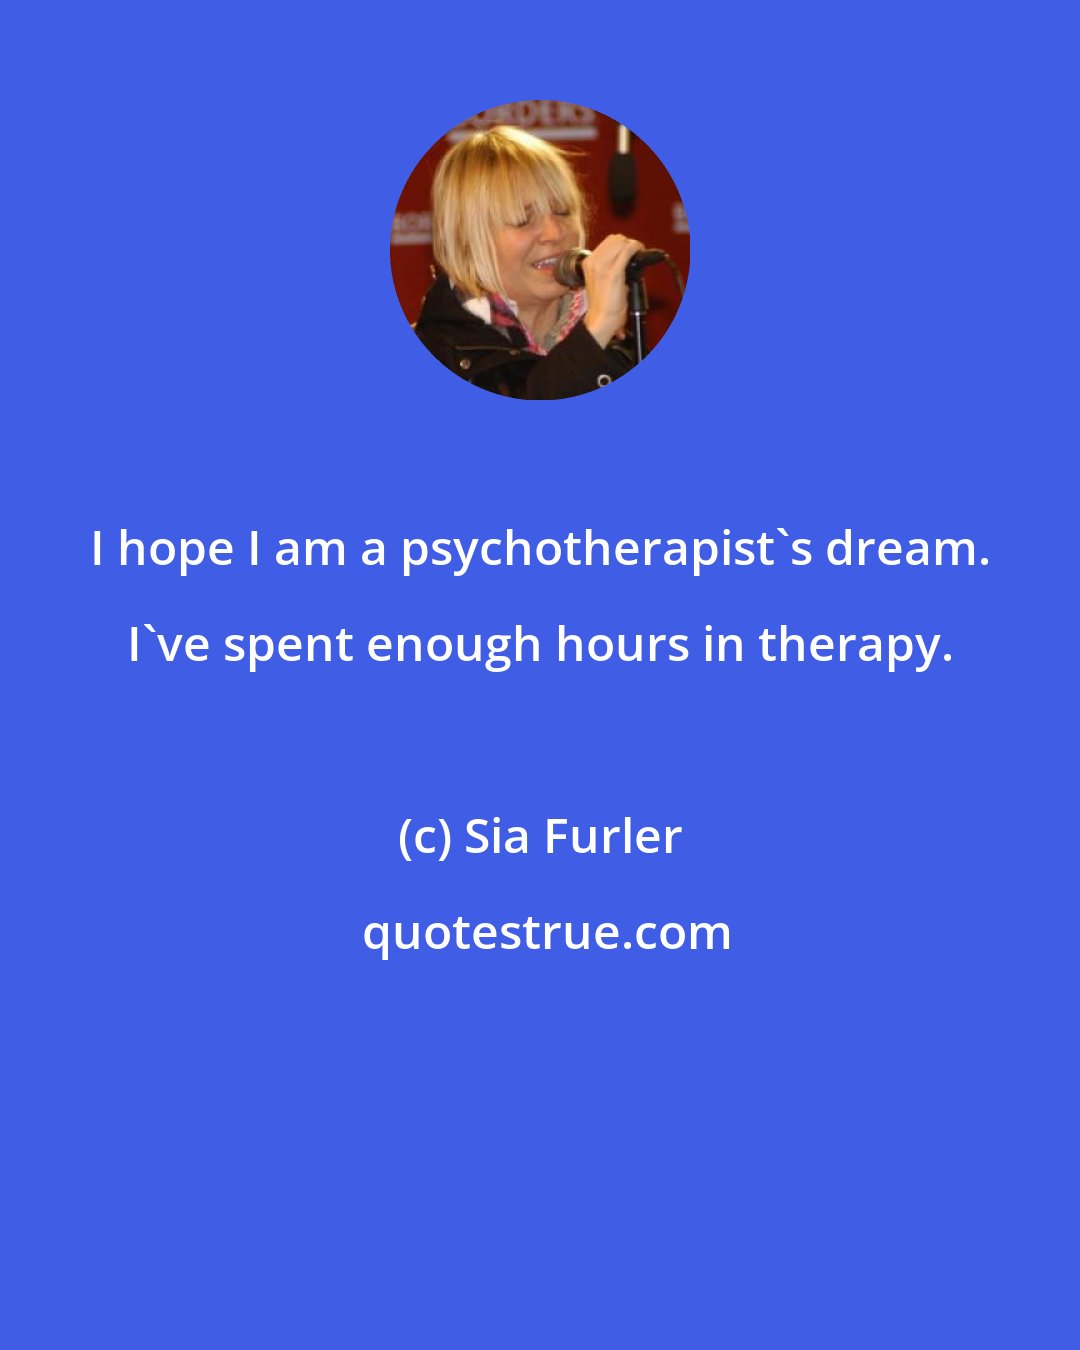 Sia Furler: I hope I am a psychotherapist's dream. I've spent enough hours in therapy.